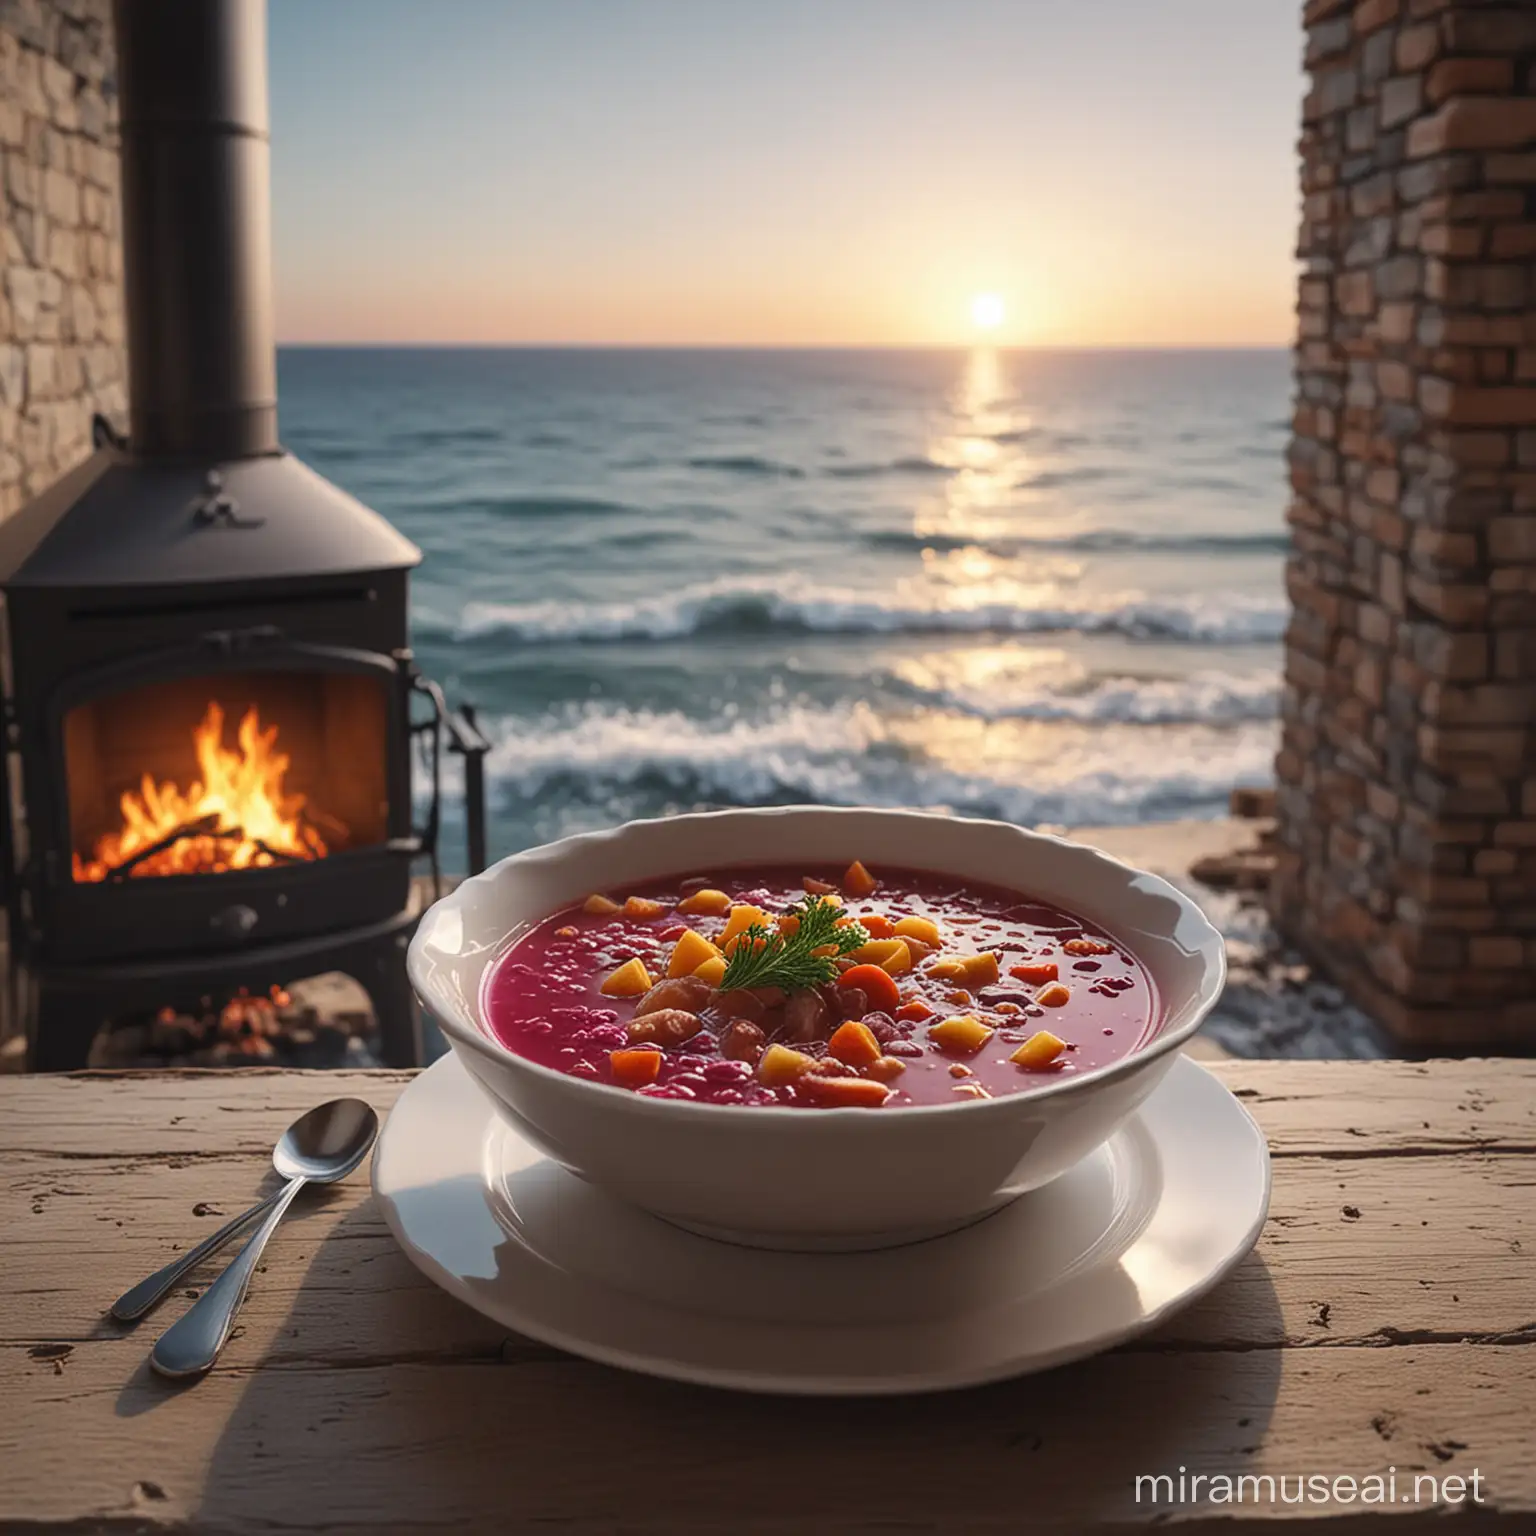 A plate with Borscht soup, in front of a fireplace near the ocean. realistic image, RAW, 8k